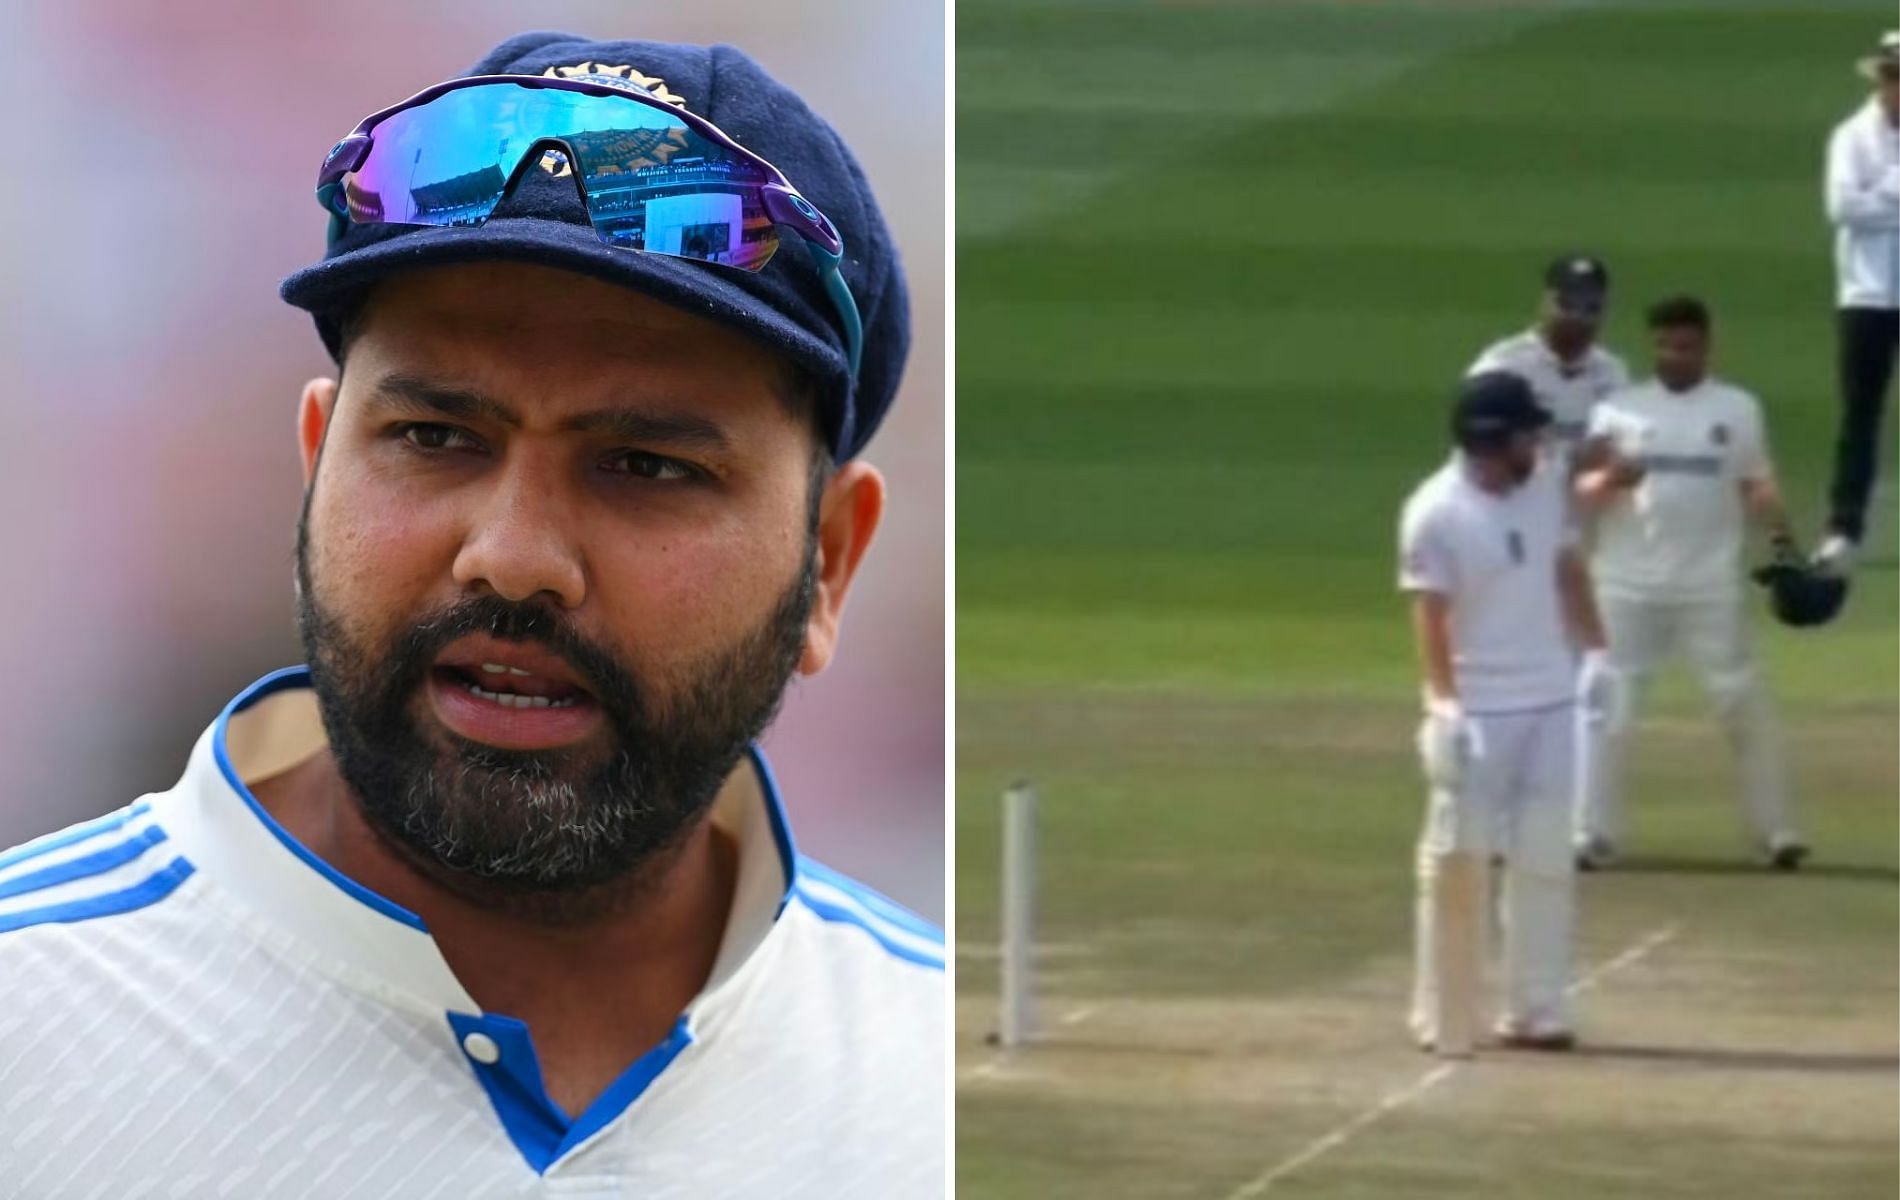 Rohit Sharma and Sarfaraz Khan were involved in a funny moment on Day 1 